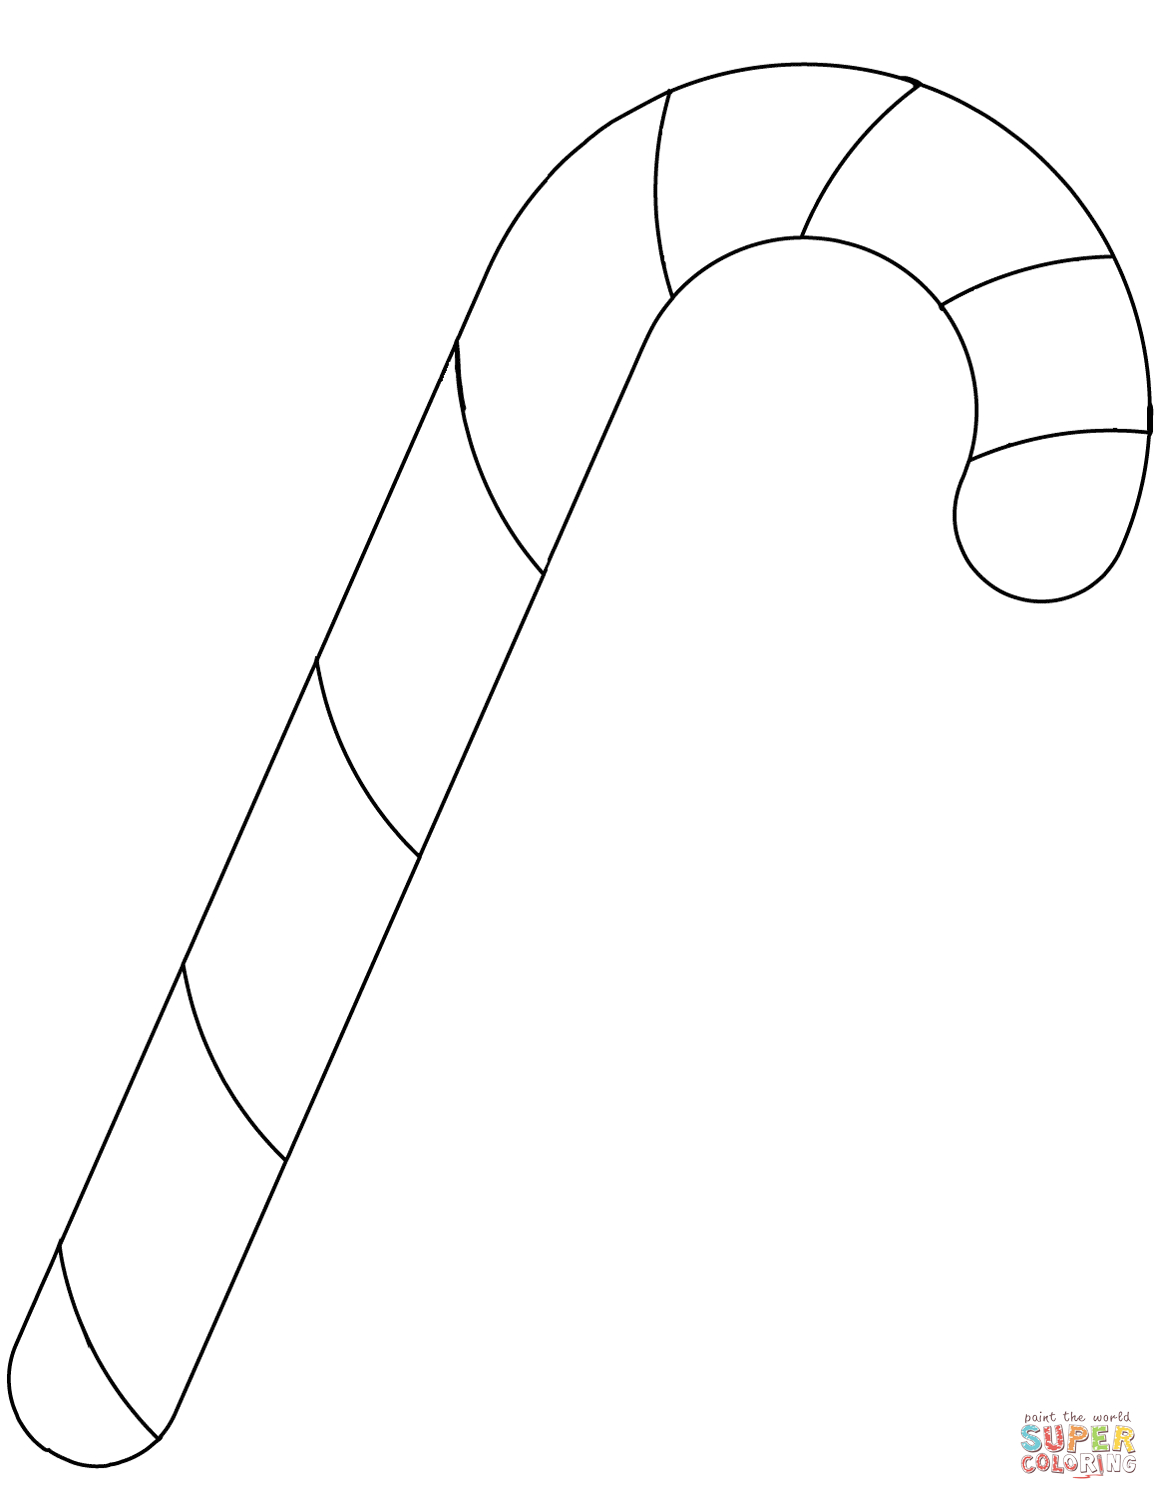 Free Candy Cane Template Printable Free Printable A to Z